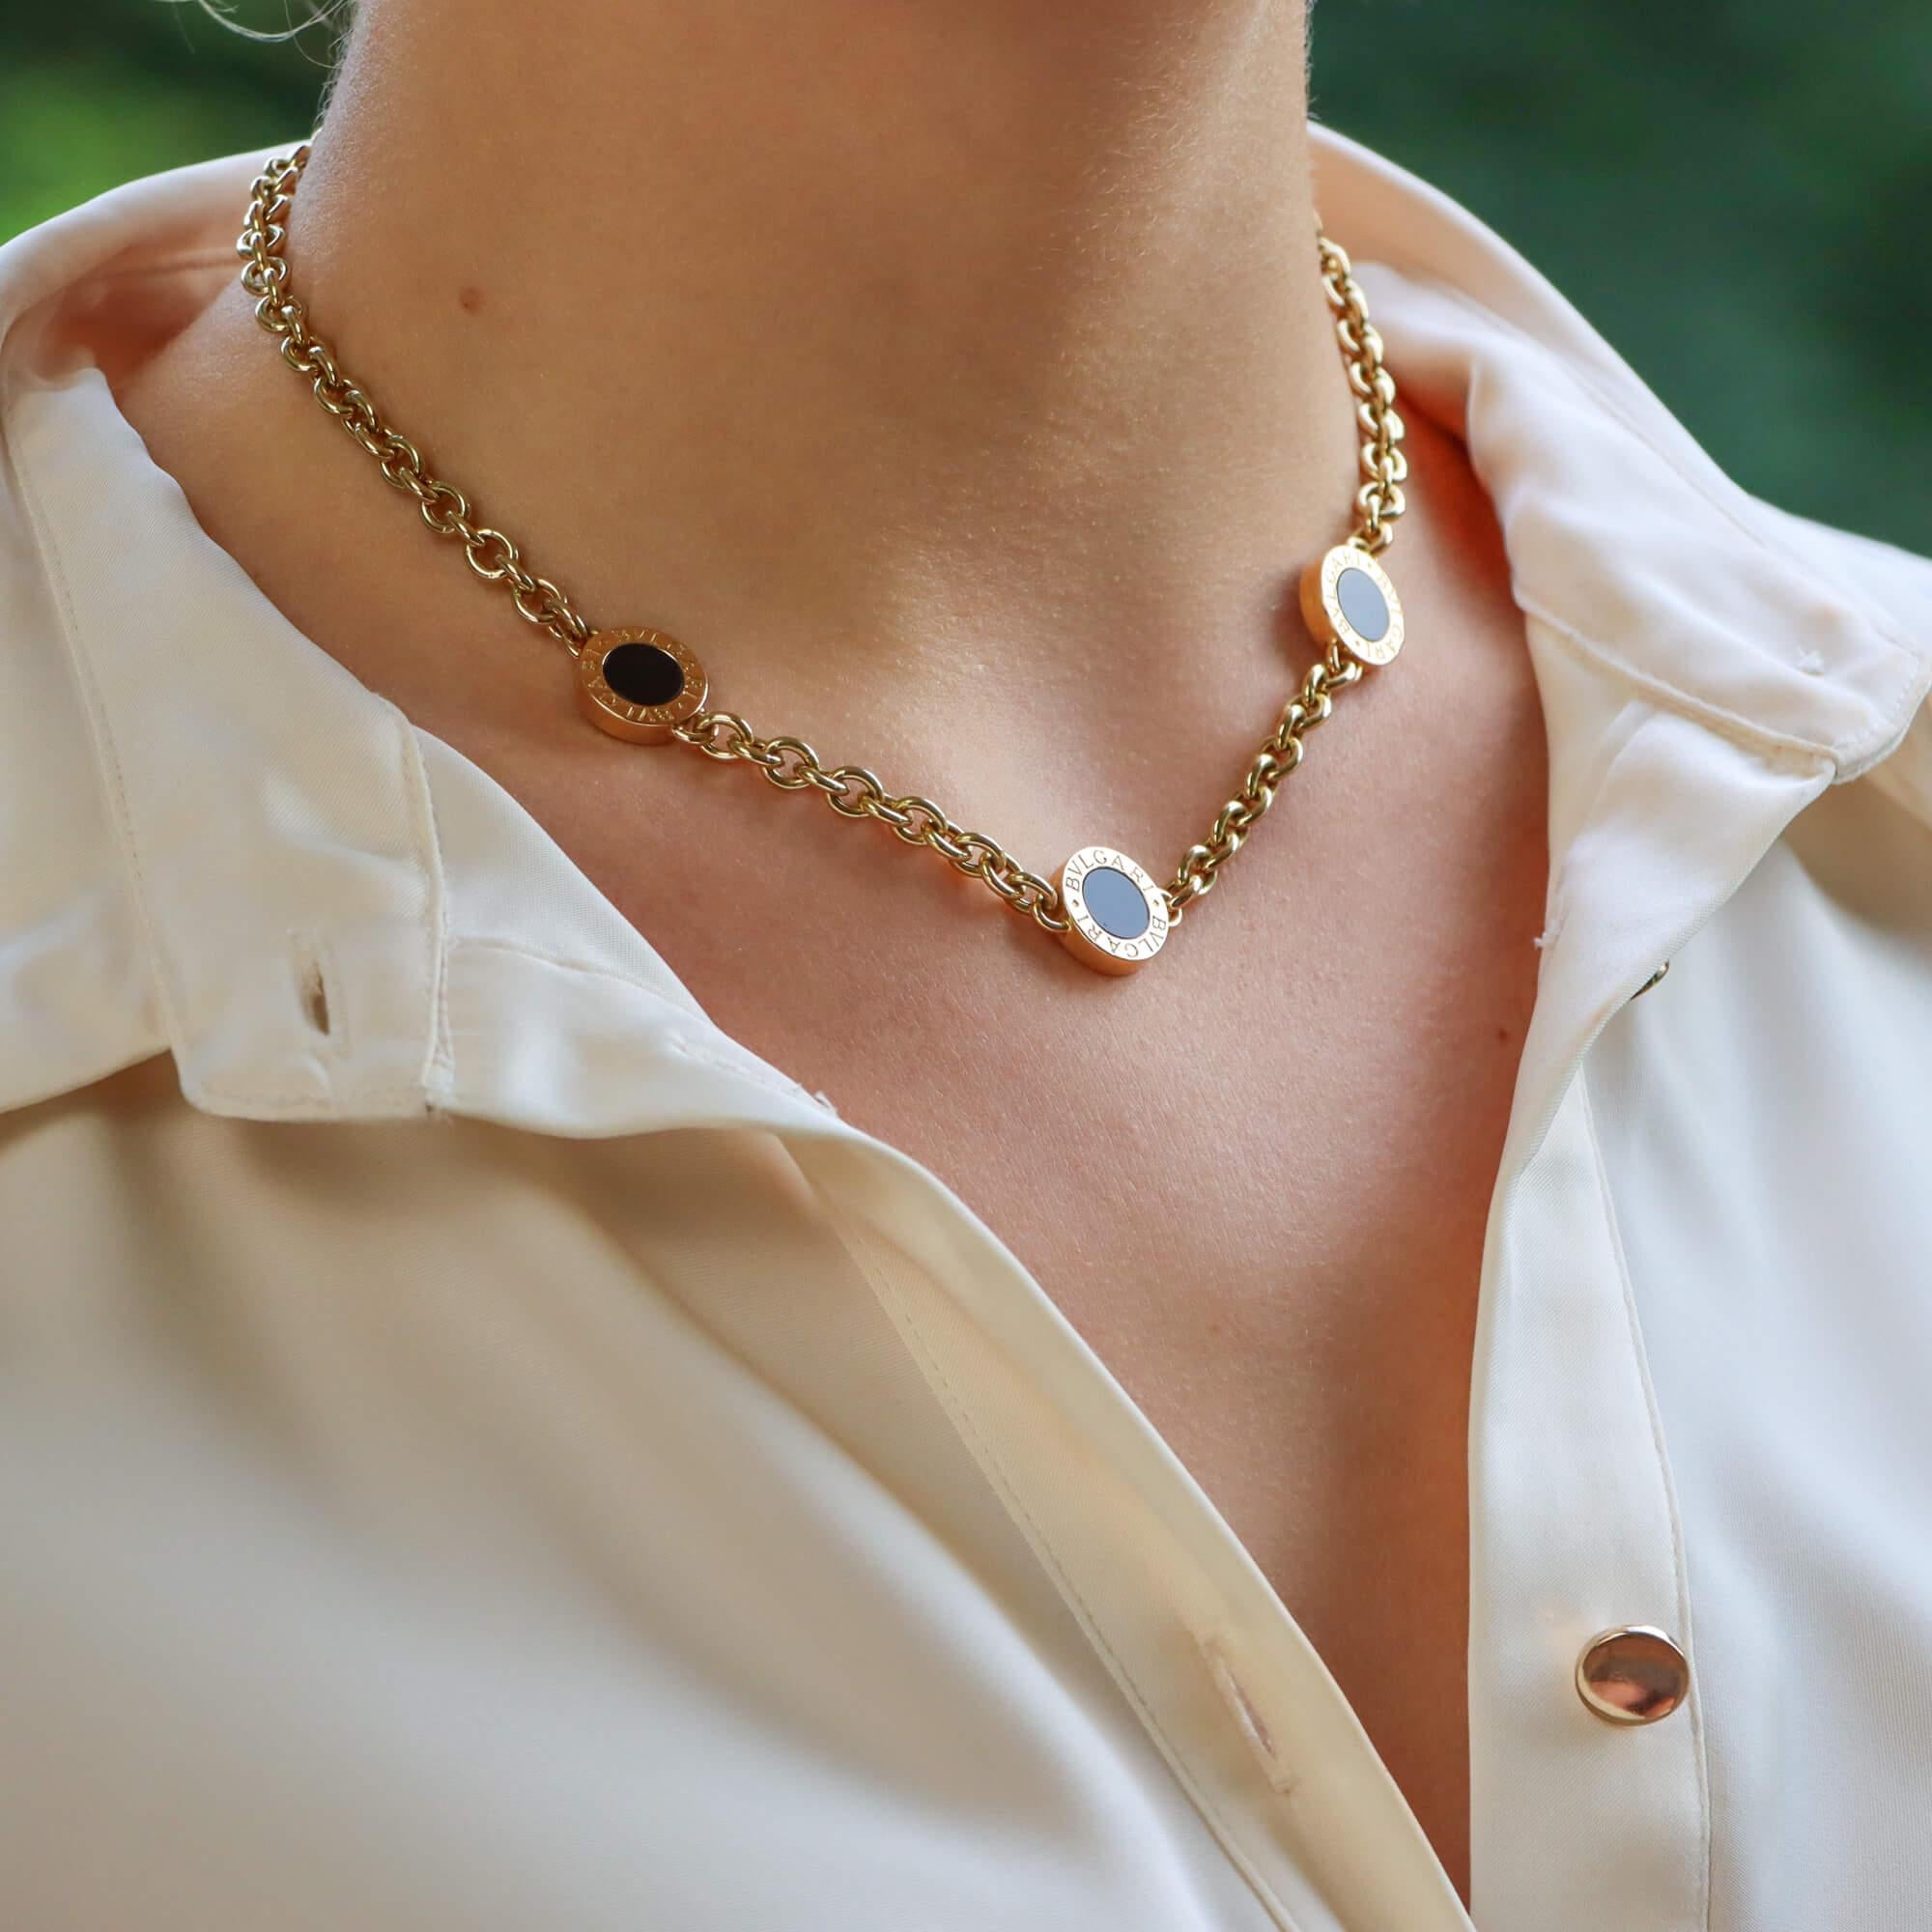 A stylish vintage Bvlgari onyx disc chunky chain necklace set in 18k yellow.

From a now discontinued design in the ‘Bvlgari Bvlgari’ collection, the necklace is composed of three yellow gold and onyx discs, engraved in the border with the brands